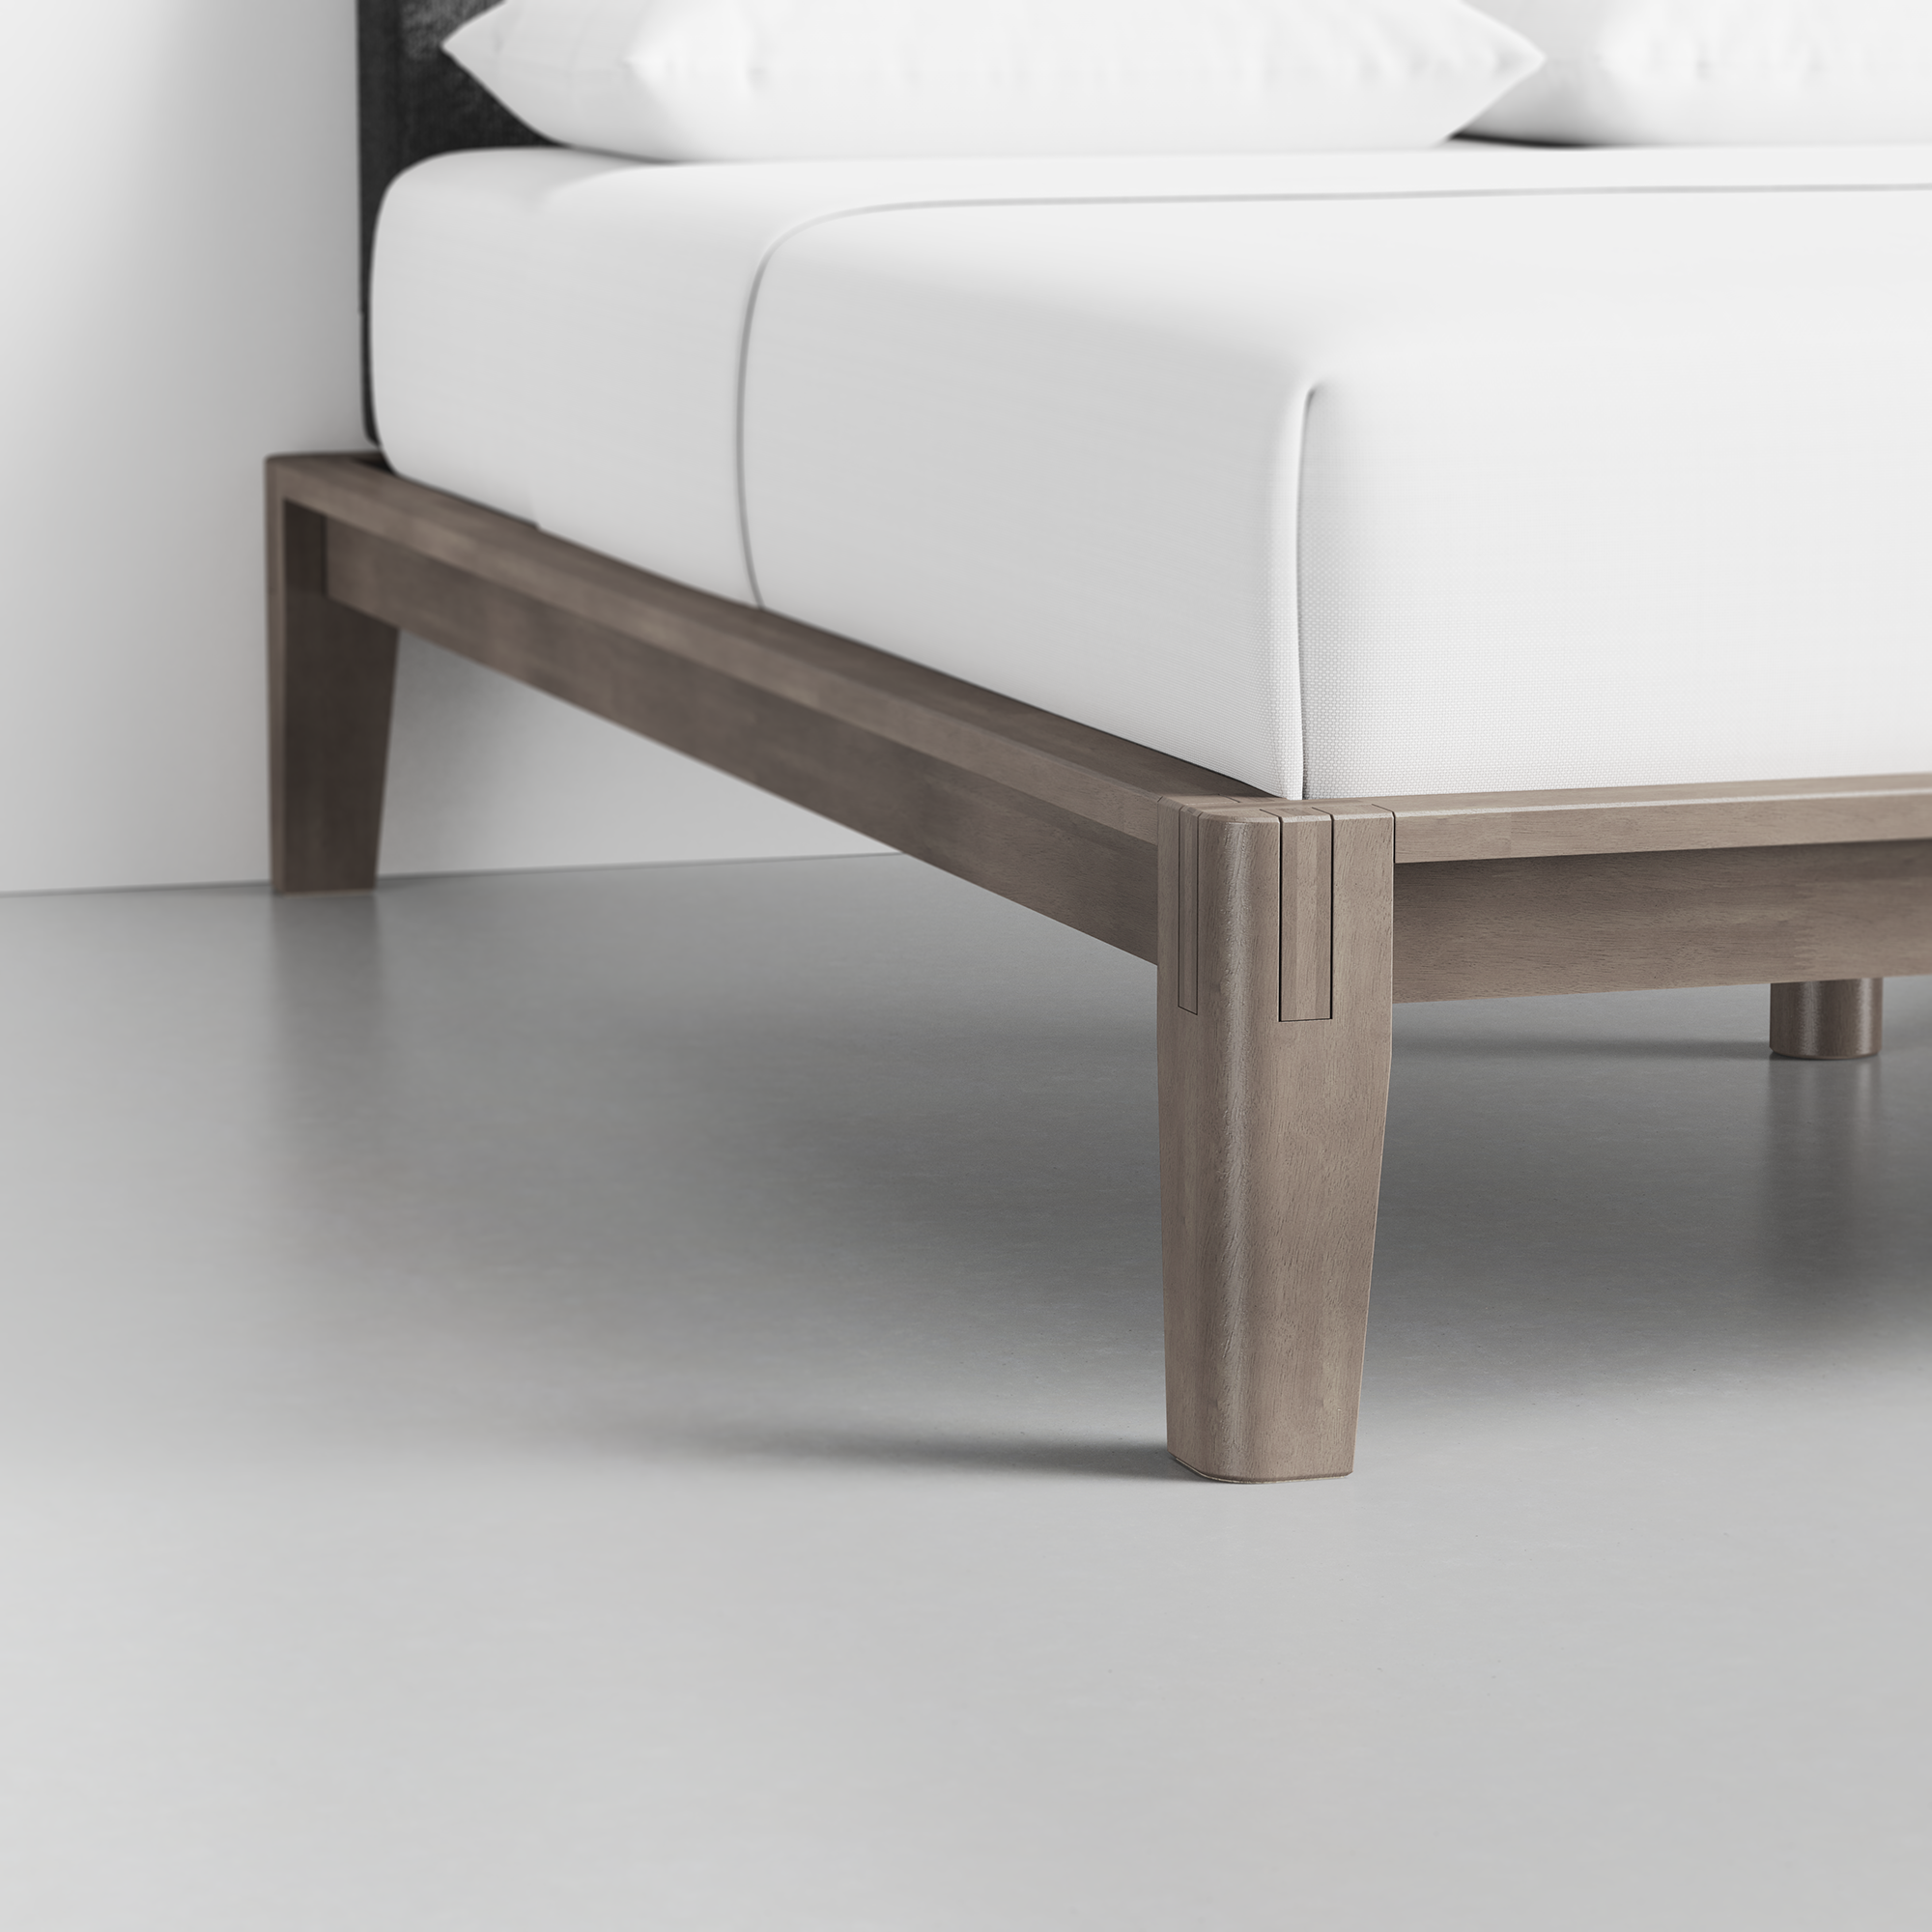 The Bed (Grey / Graphite) - Render - Foot Detail